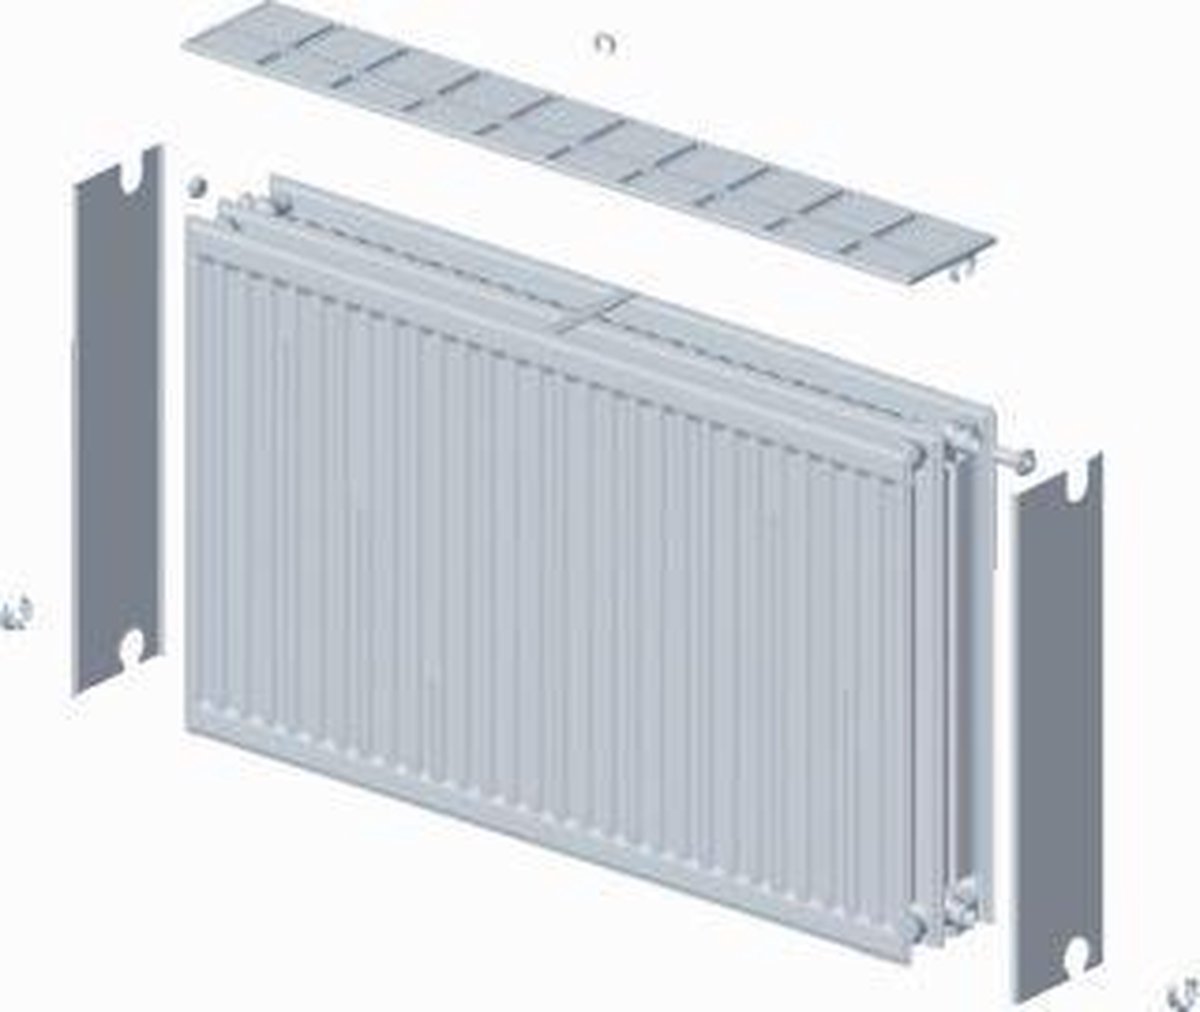 Stelrad paneelradiator Novello, staal, wit, (hxlxd) 700x1000x158mm, 33